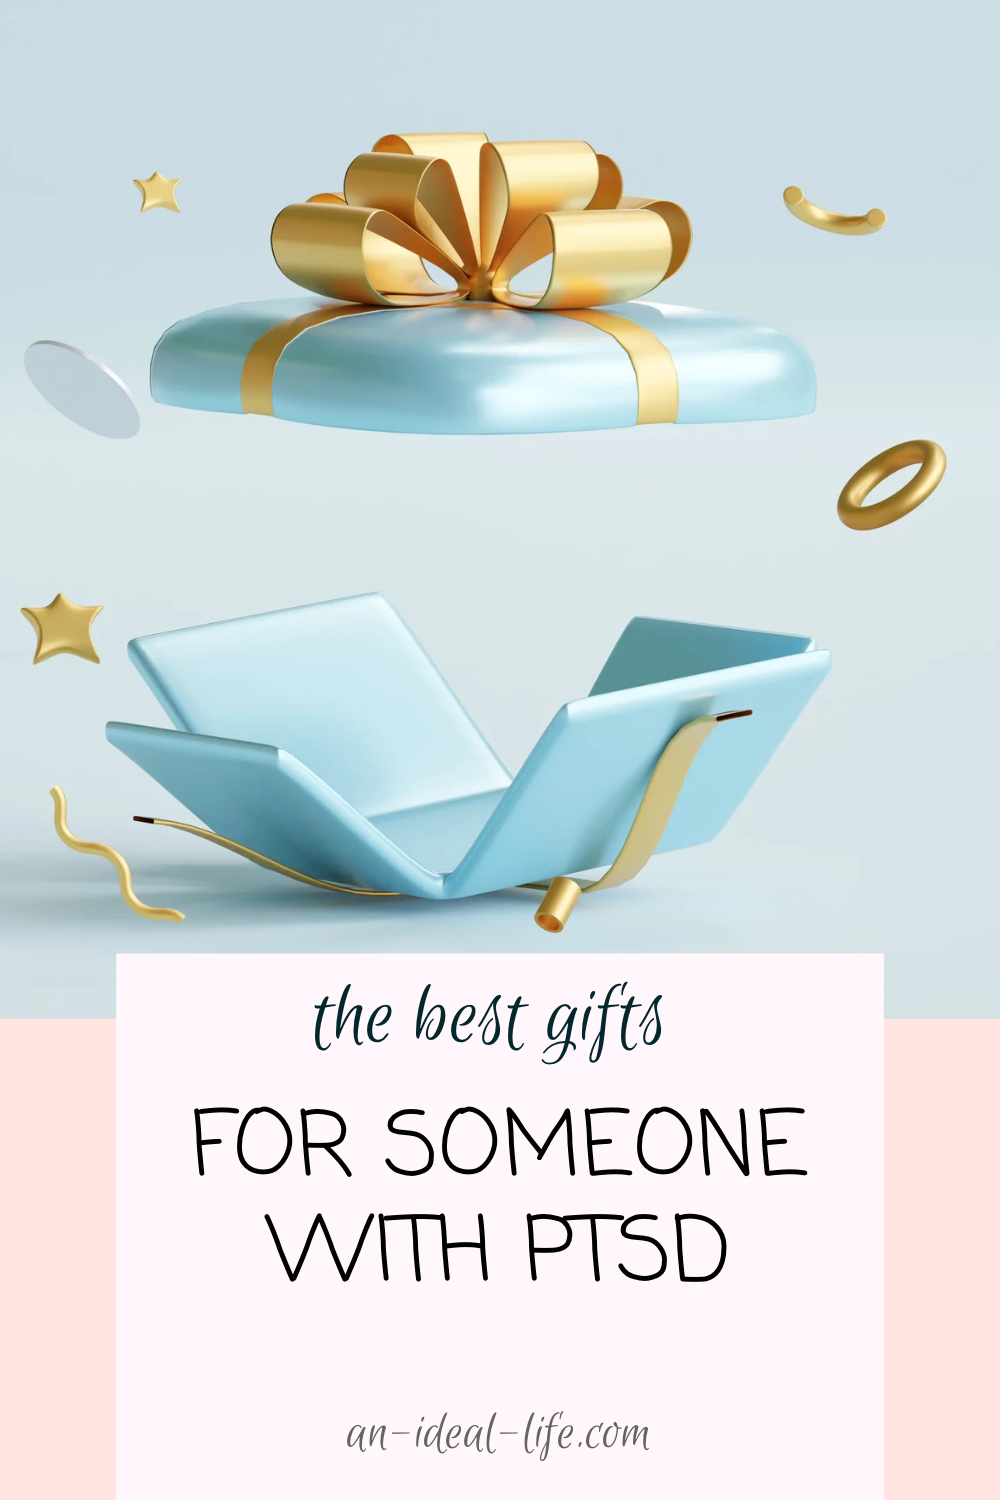 The Best Gifts for Someone With PTSD